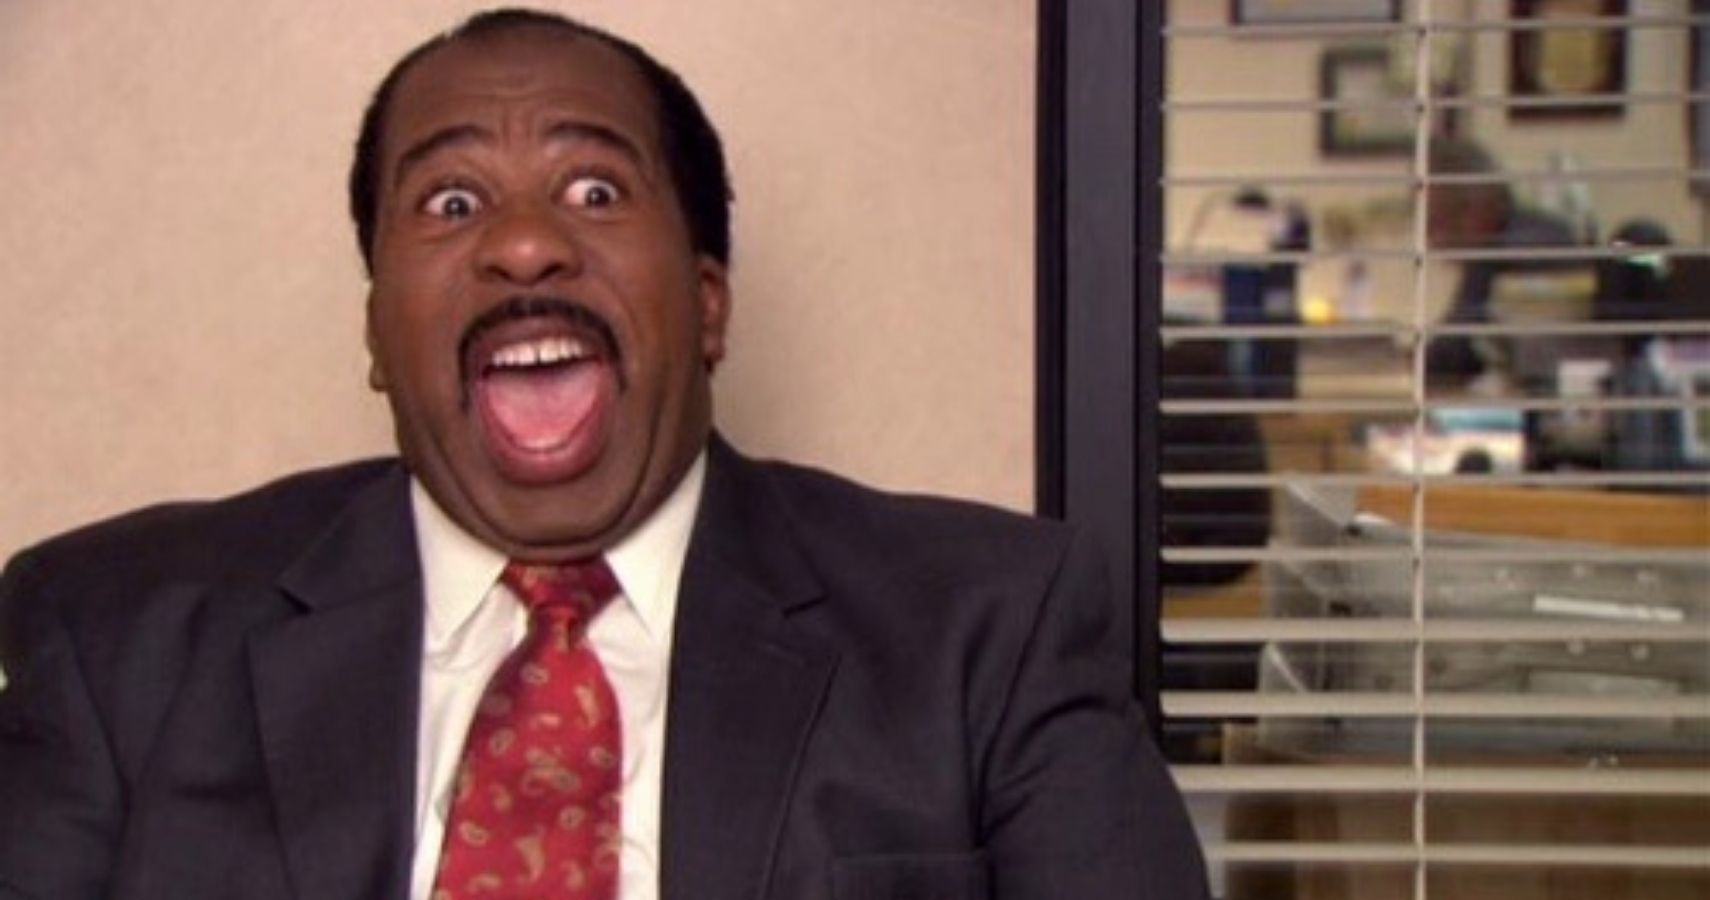 The Office: 10 Things We Didn't Know About Stanley